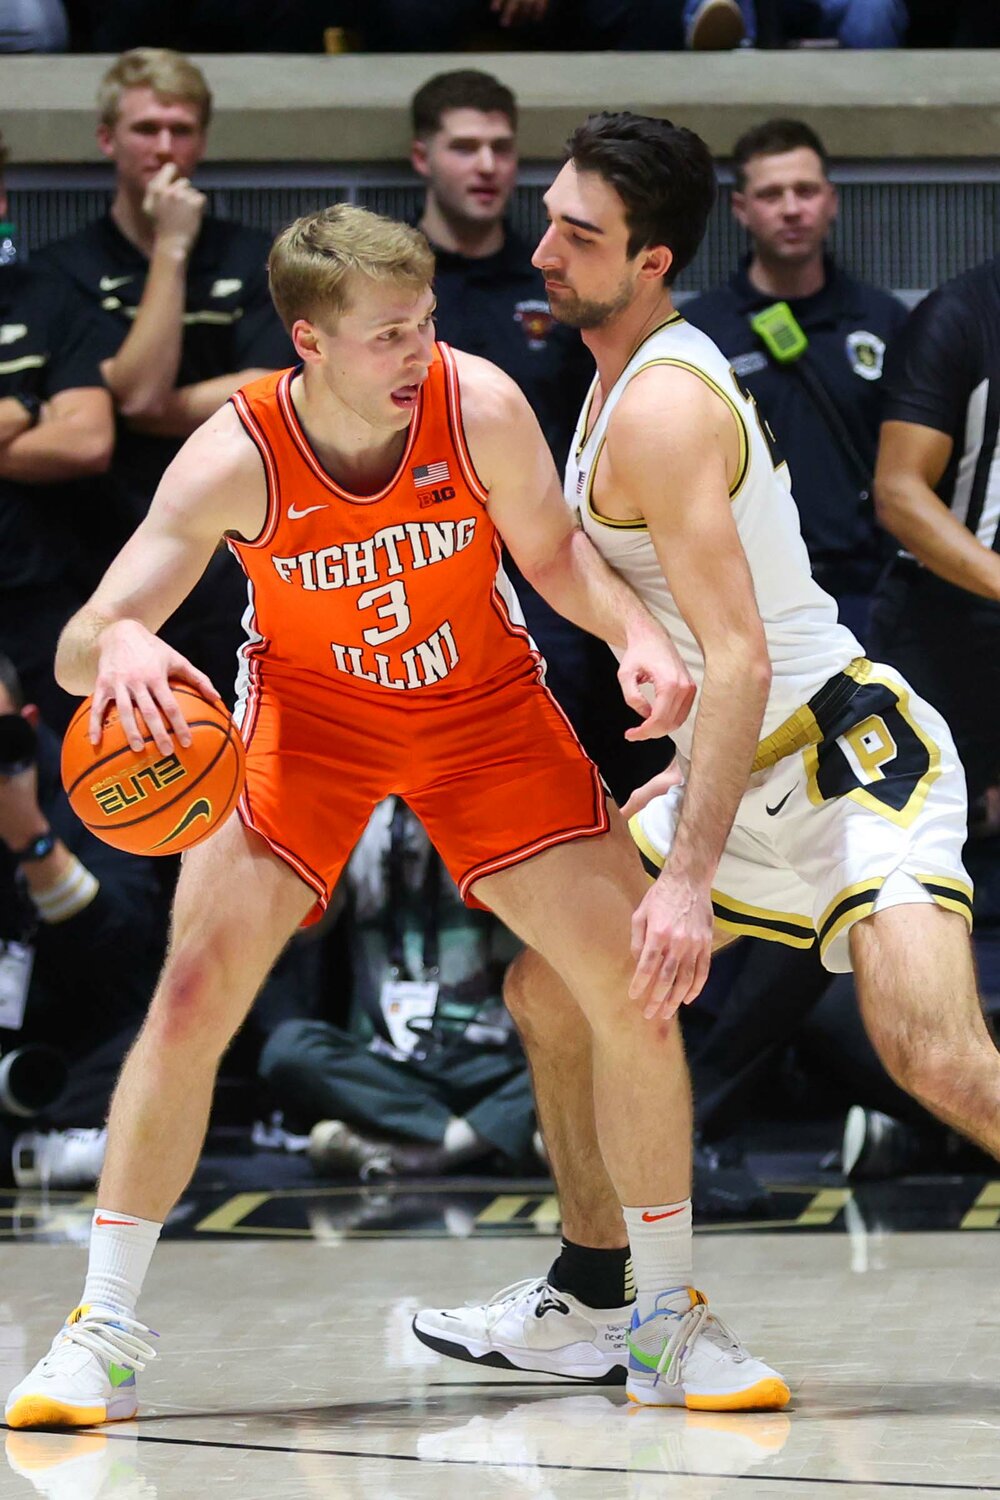 Ethan Morton of Purdue - bodying up on Marcus Domask of Illinois